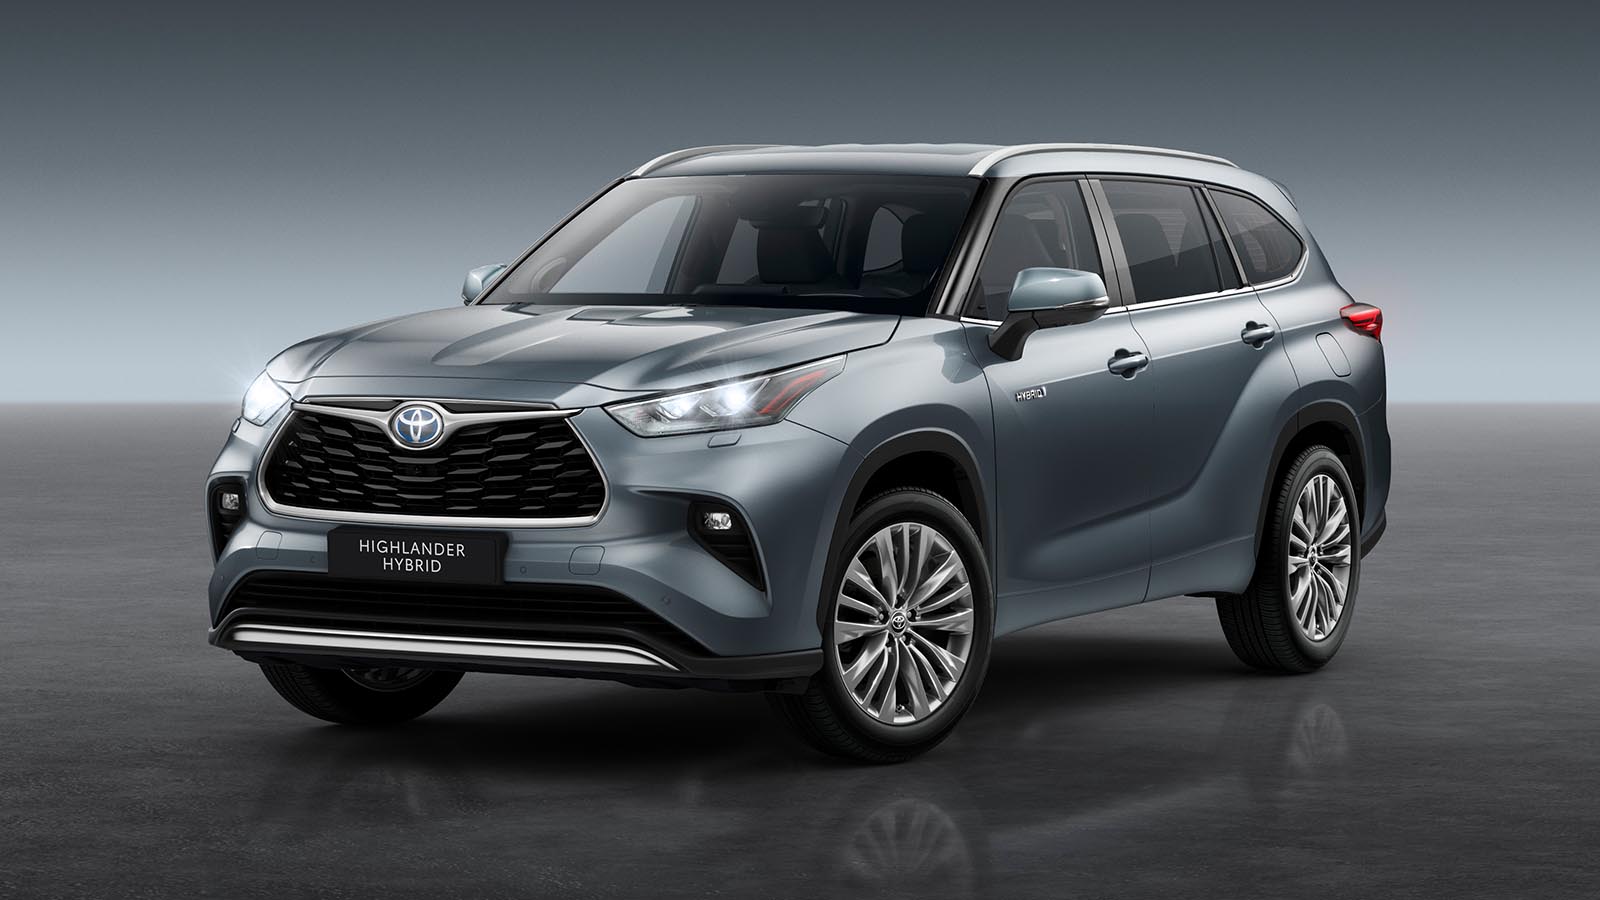 Toyota to launch all new 7-seater Highlander in Ireland